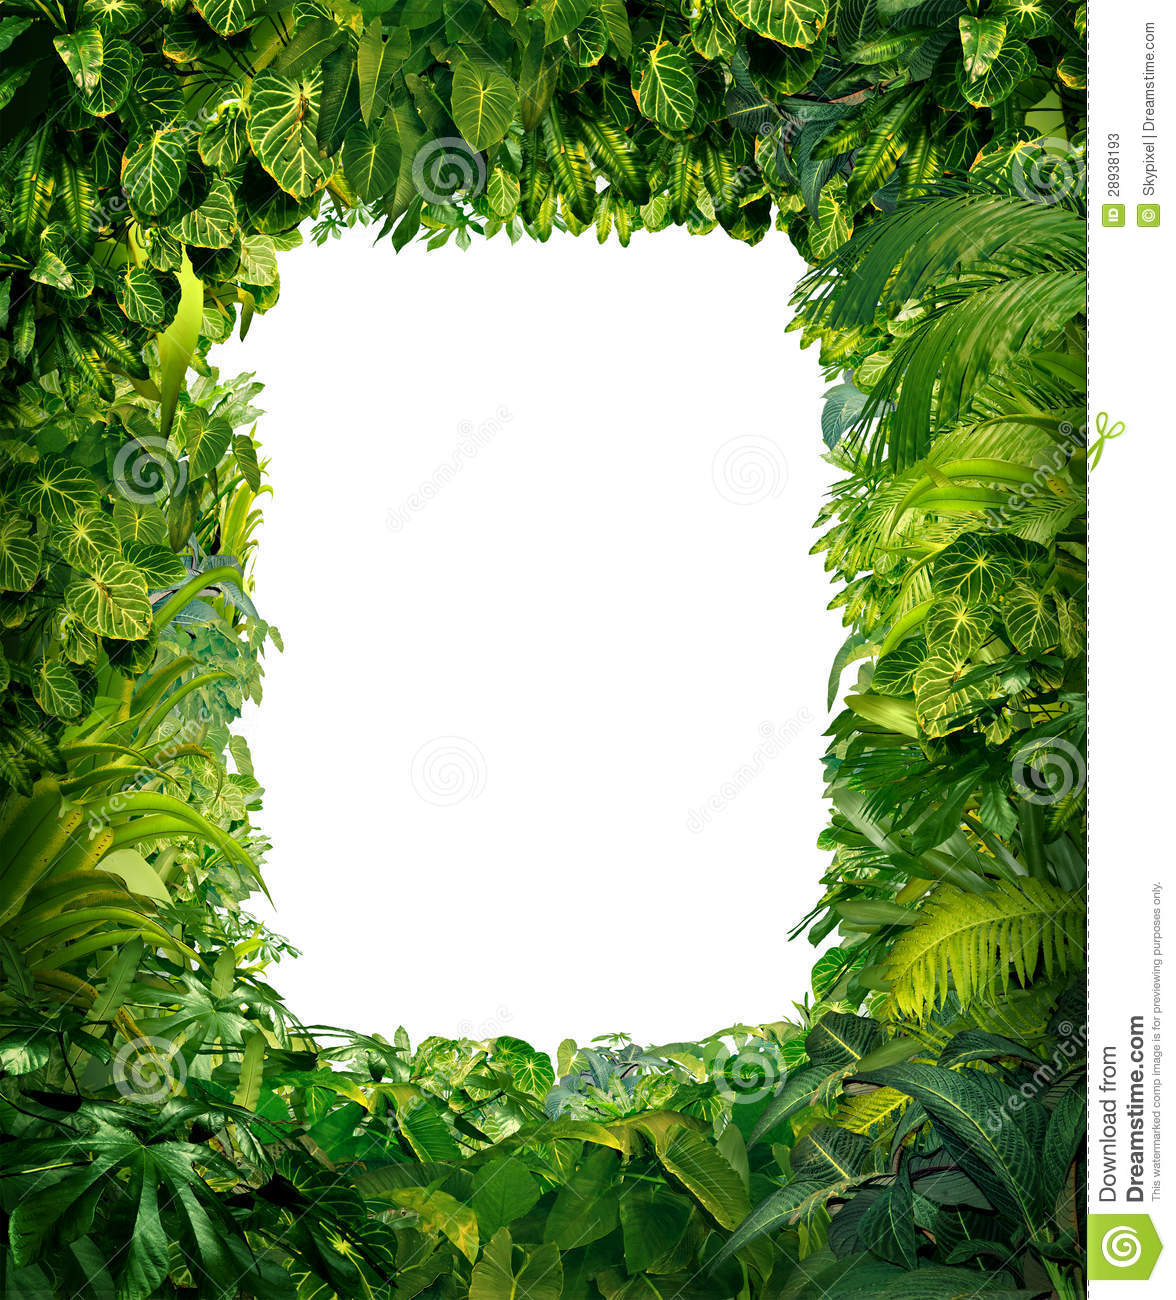 Jungle Border Blank Frame With Rich Tropical Green Plants As Ferns And